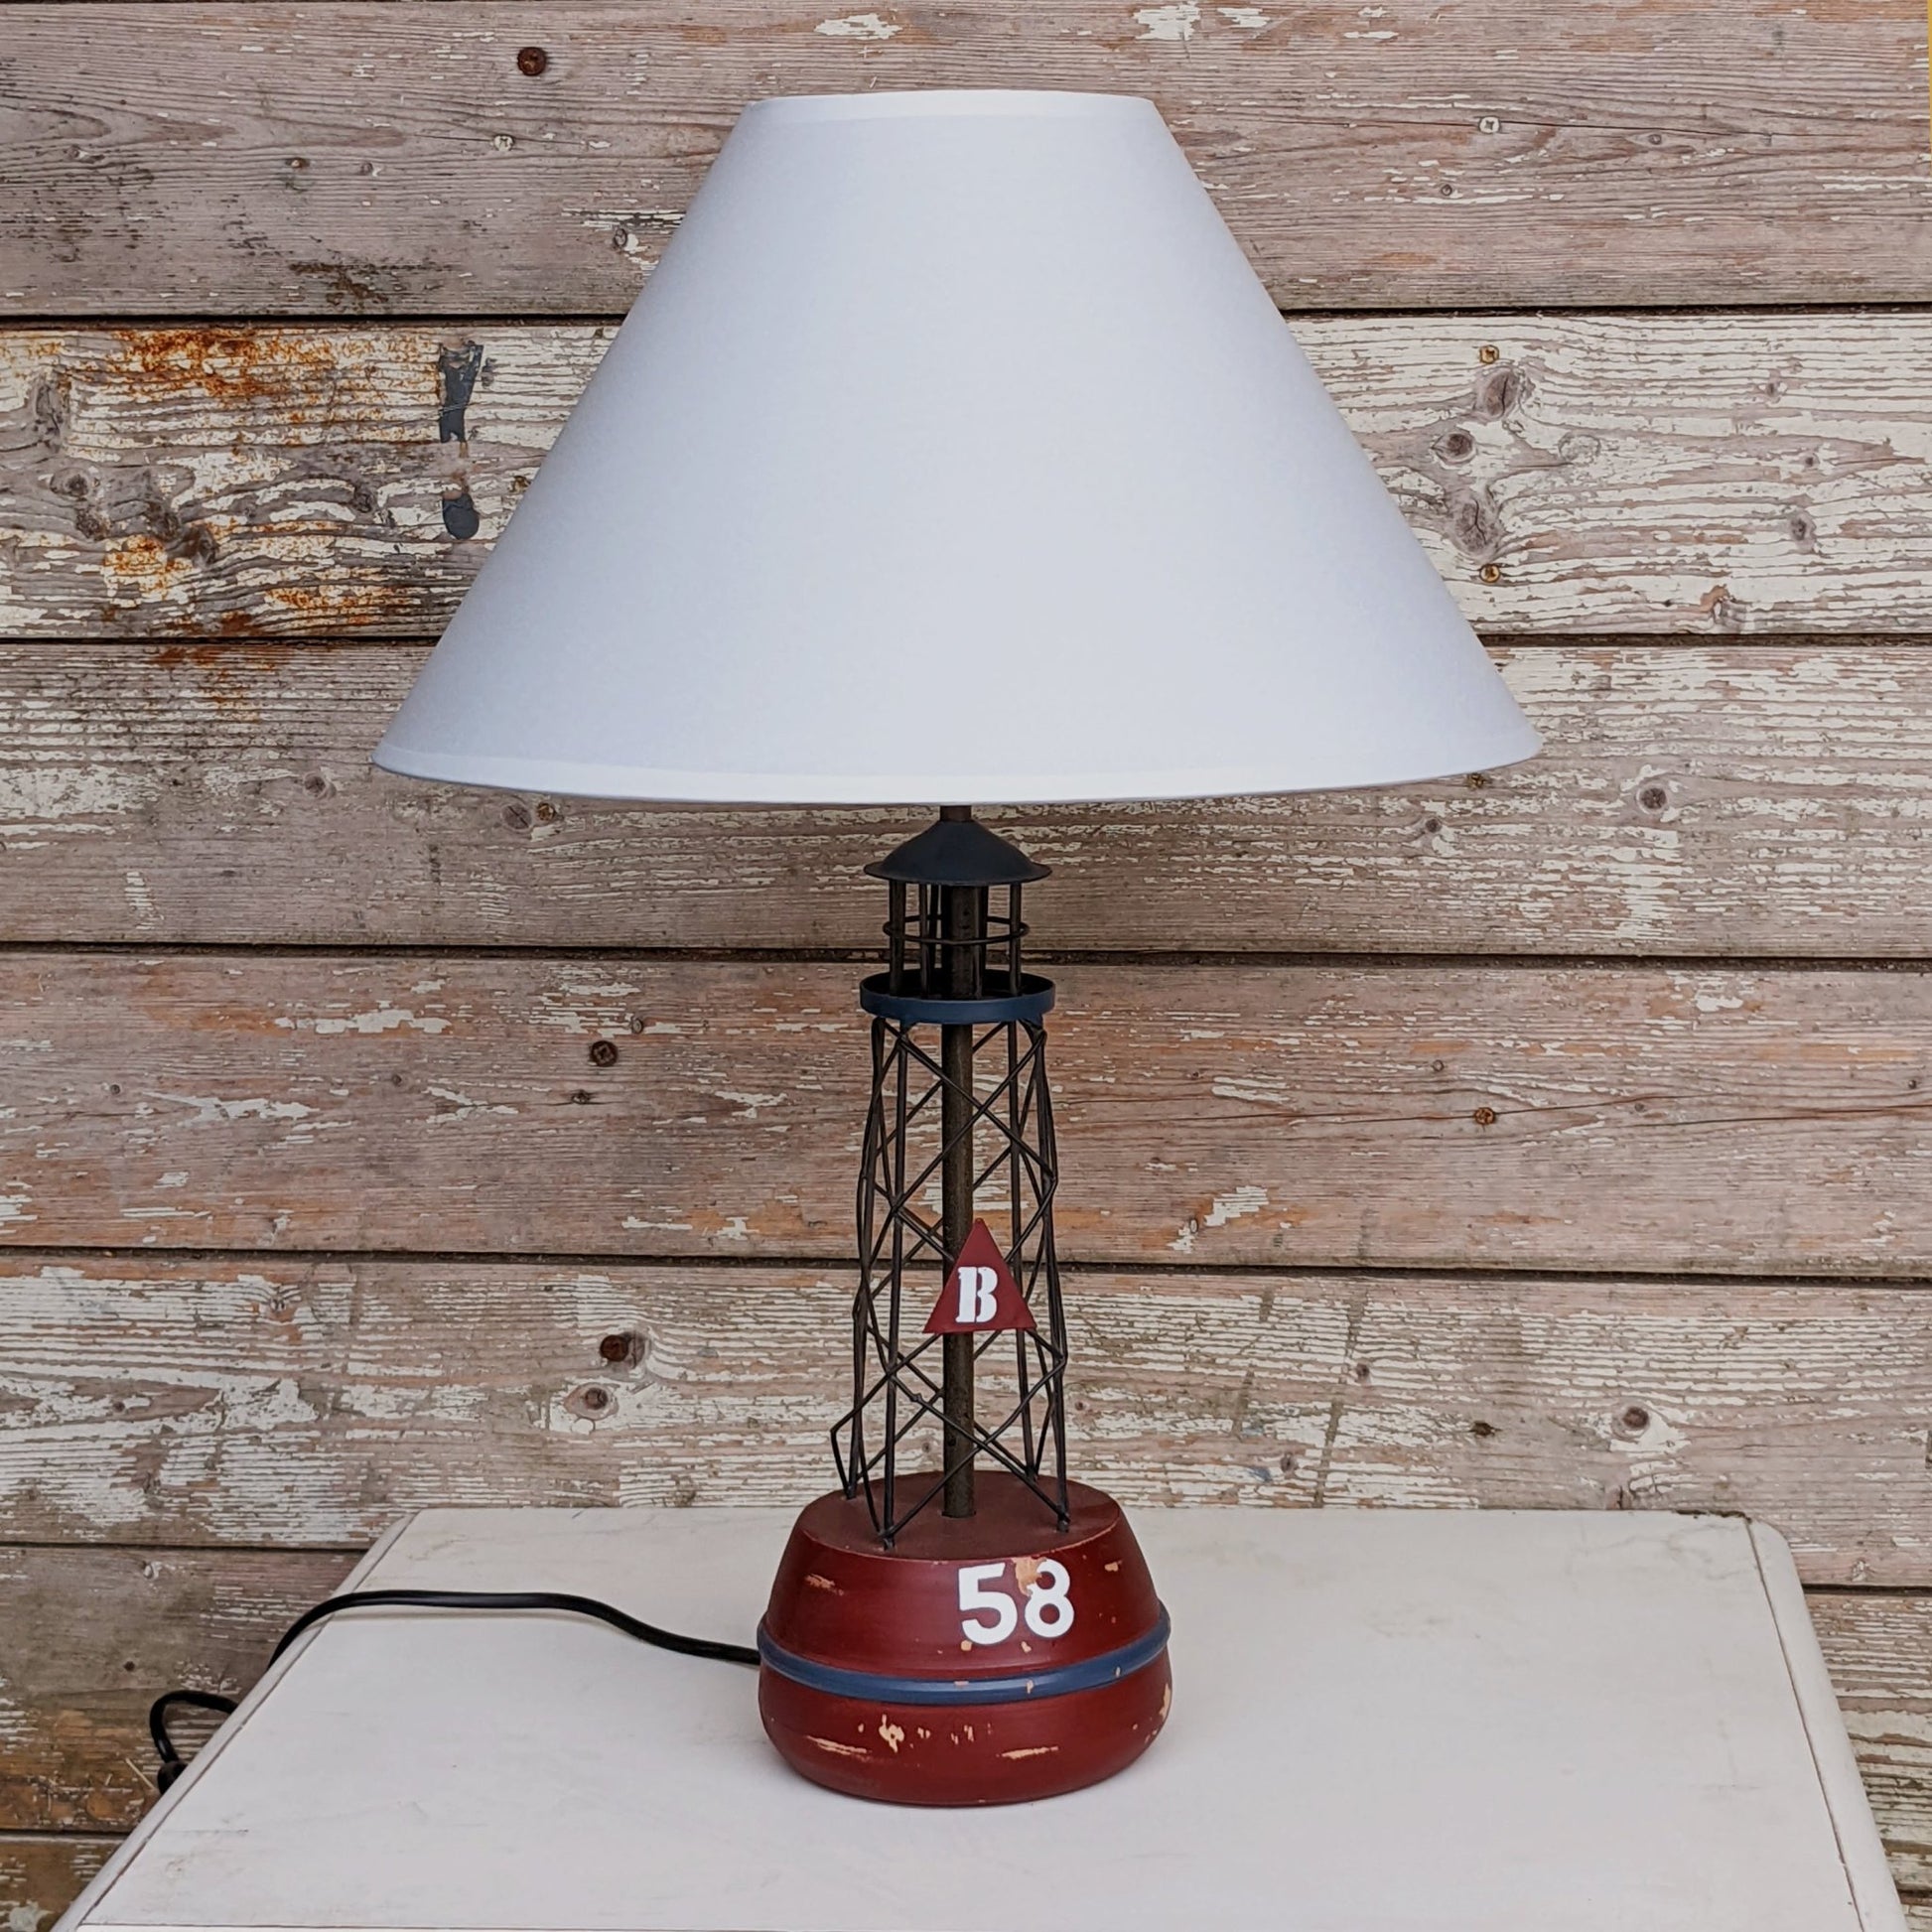 Nautical Wooden Life Buoy Lamp With Fabric Shade - LIVE LAUGH LOVE LIMITED